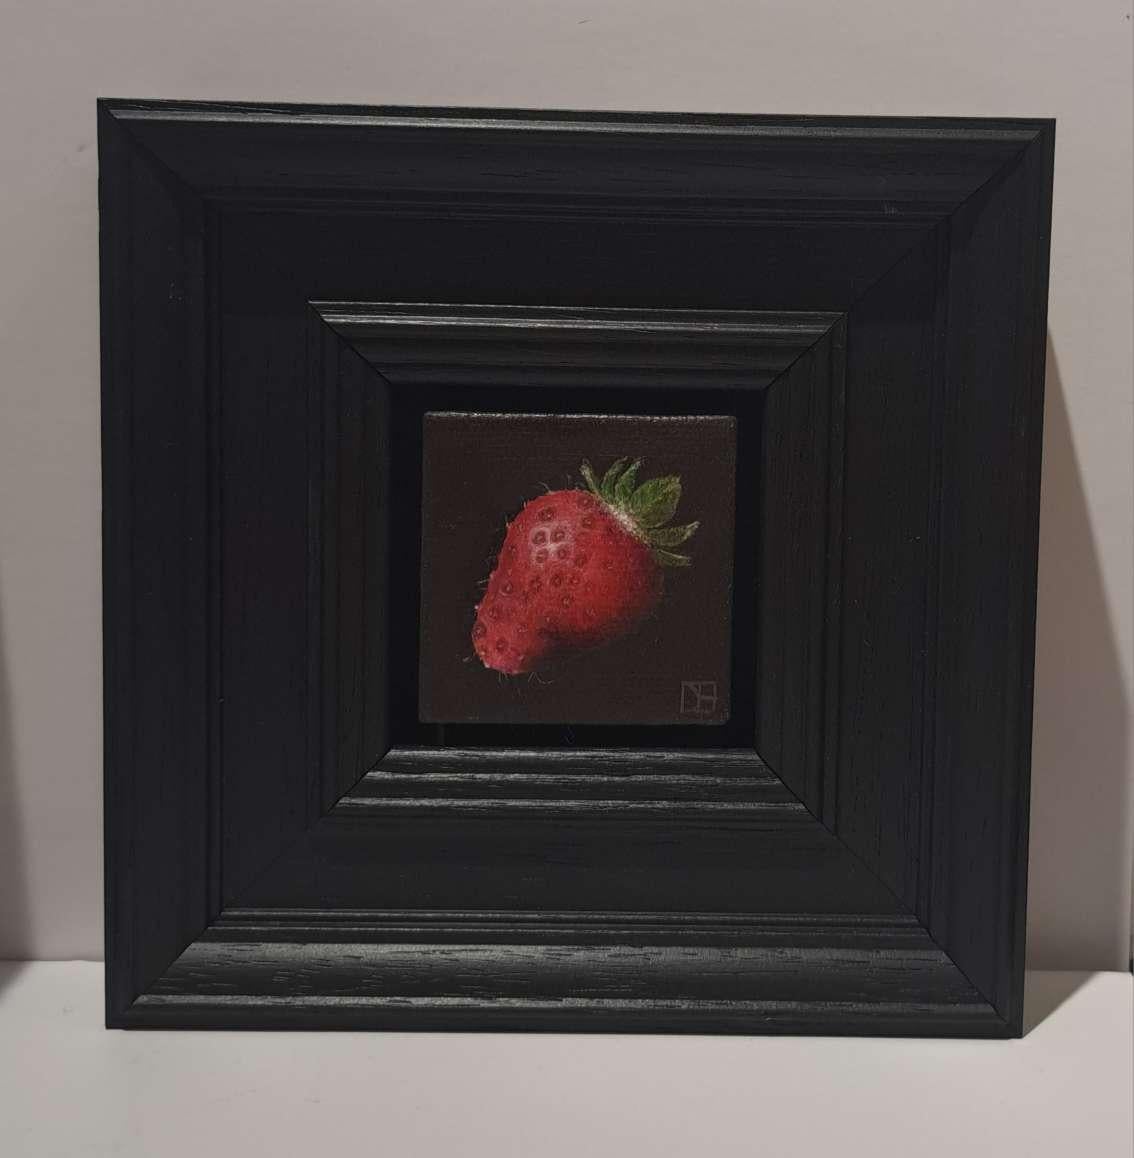 Pocket Very Ripe Strawberry is an original oil painting by Dani Humberstone as part of her Pocket Painting series featuring small scale realistic oil paintings, with a nod to baroque still life painting. The paintings are set in a black wood layered